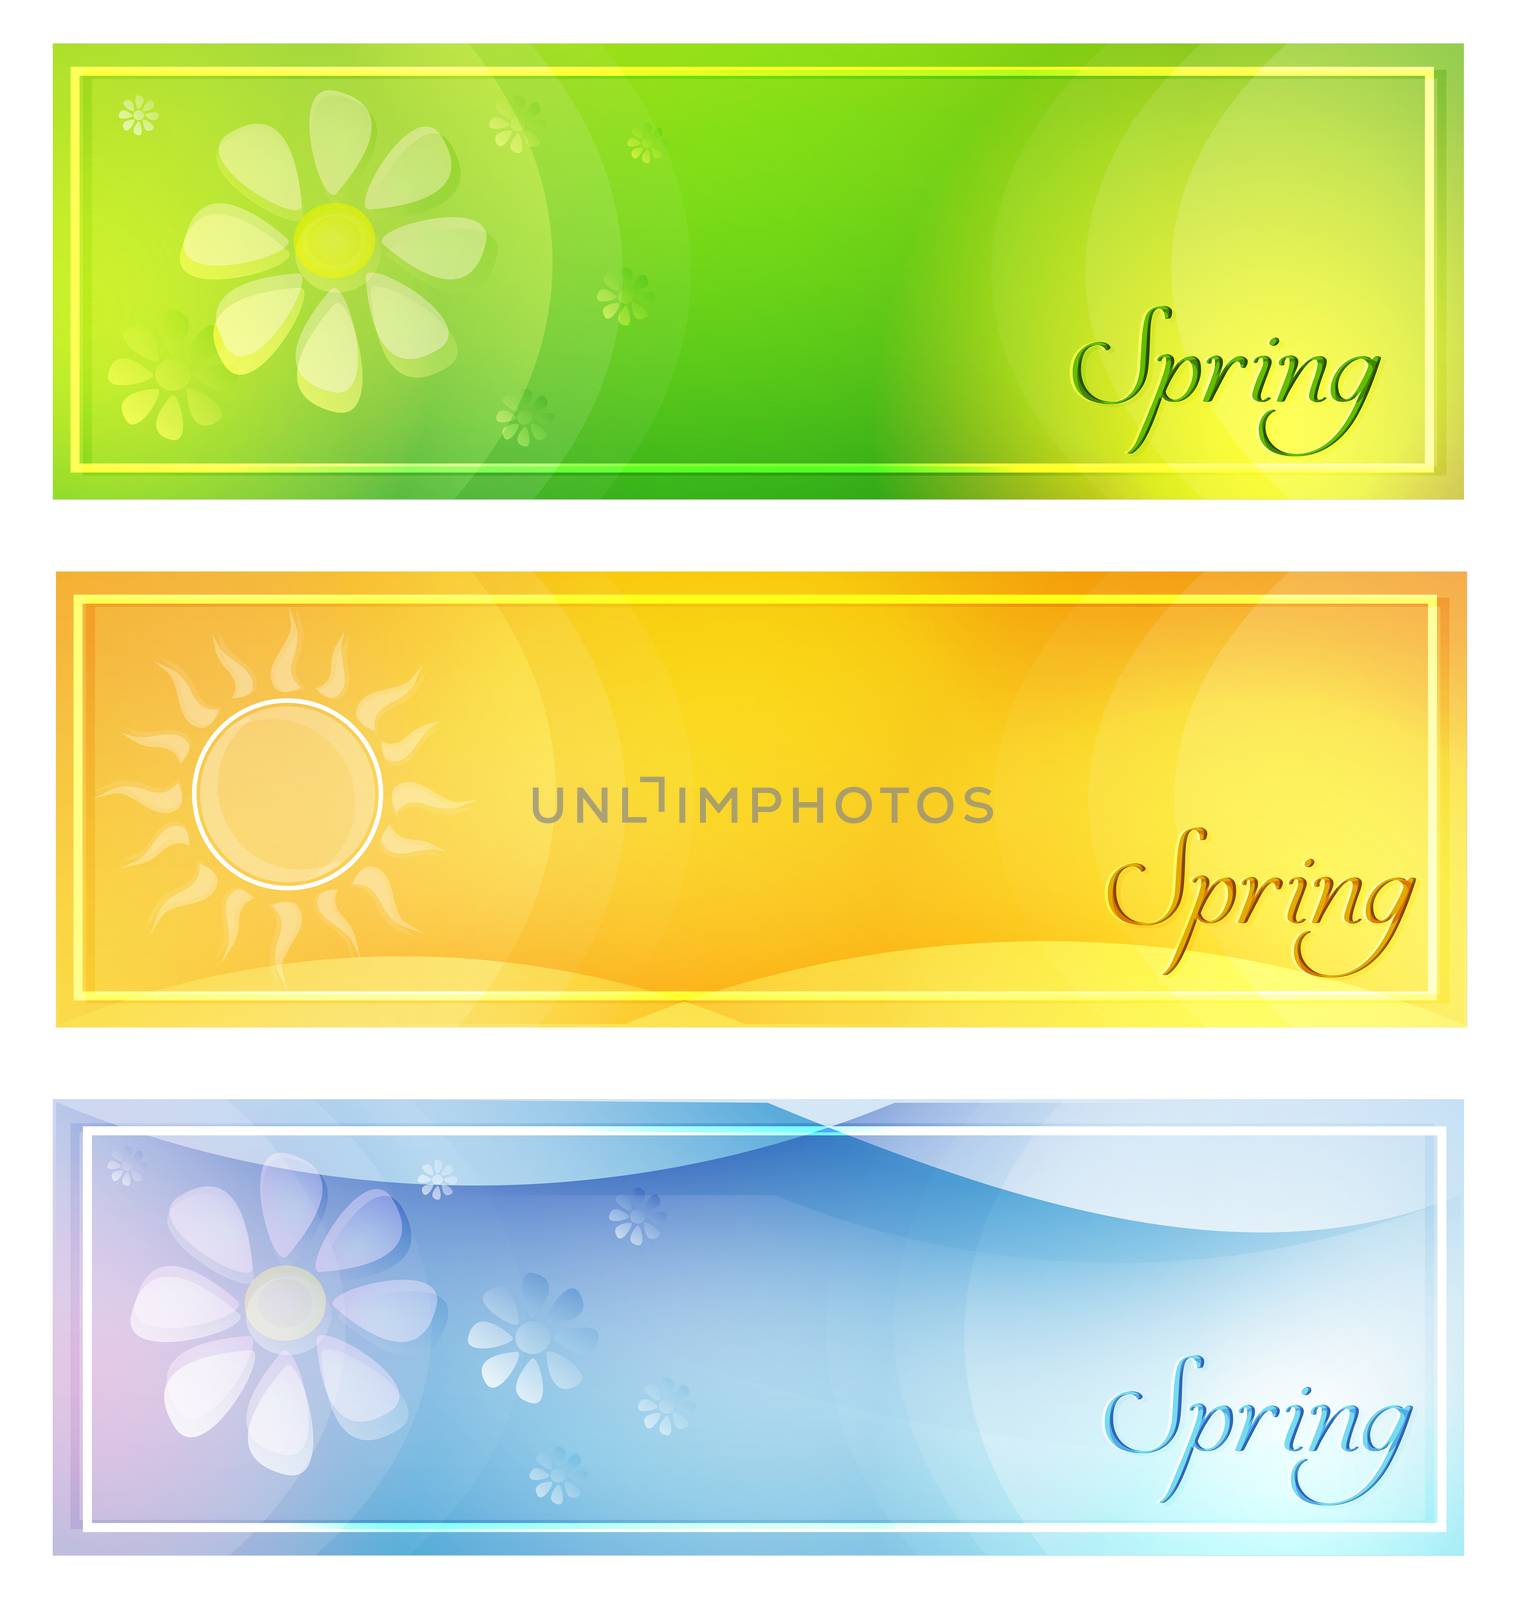 spring with sun and flowers banners by marinini